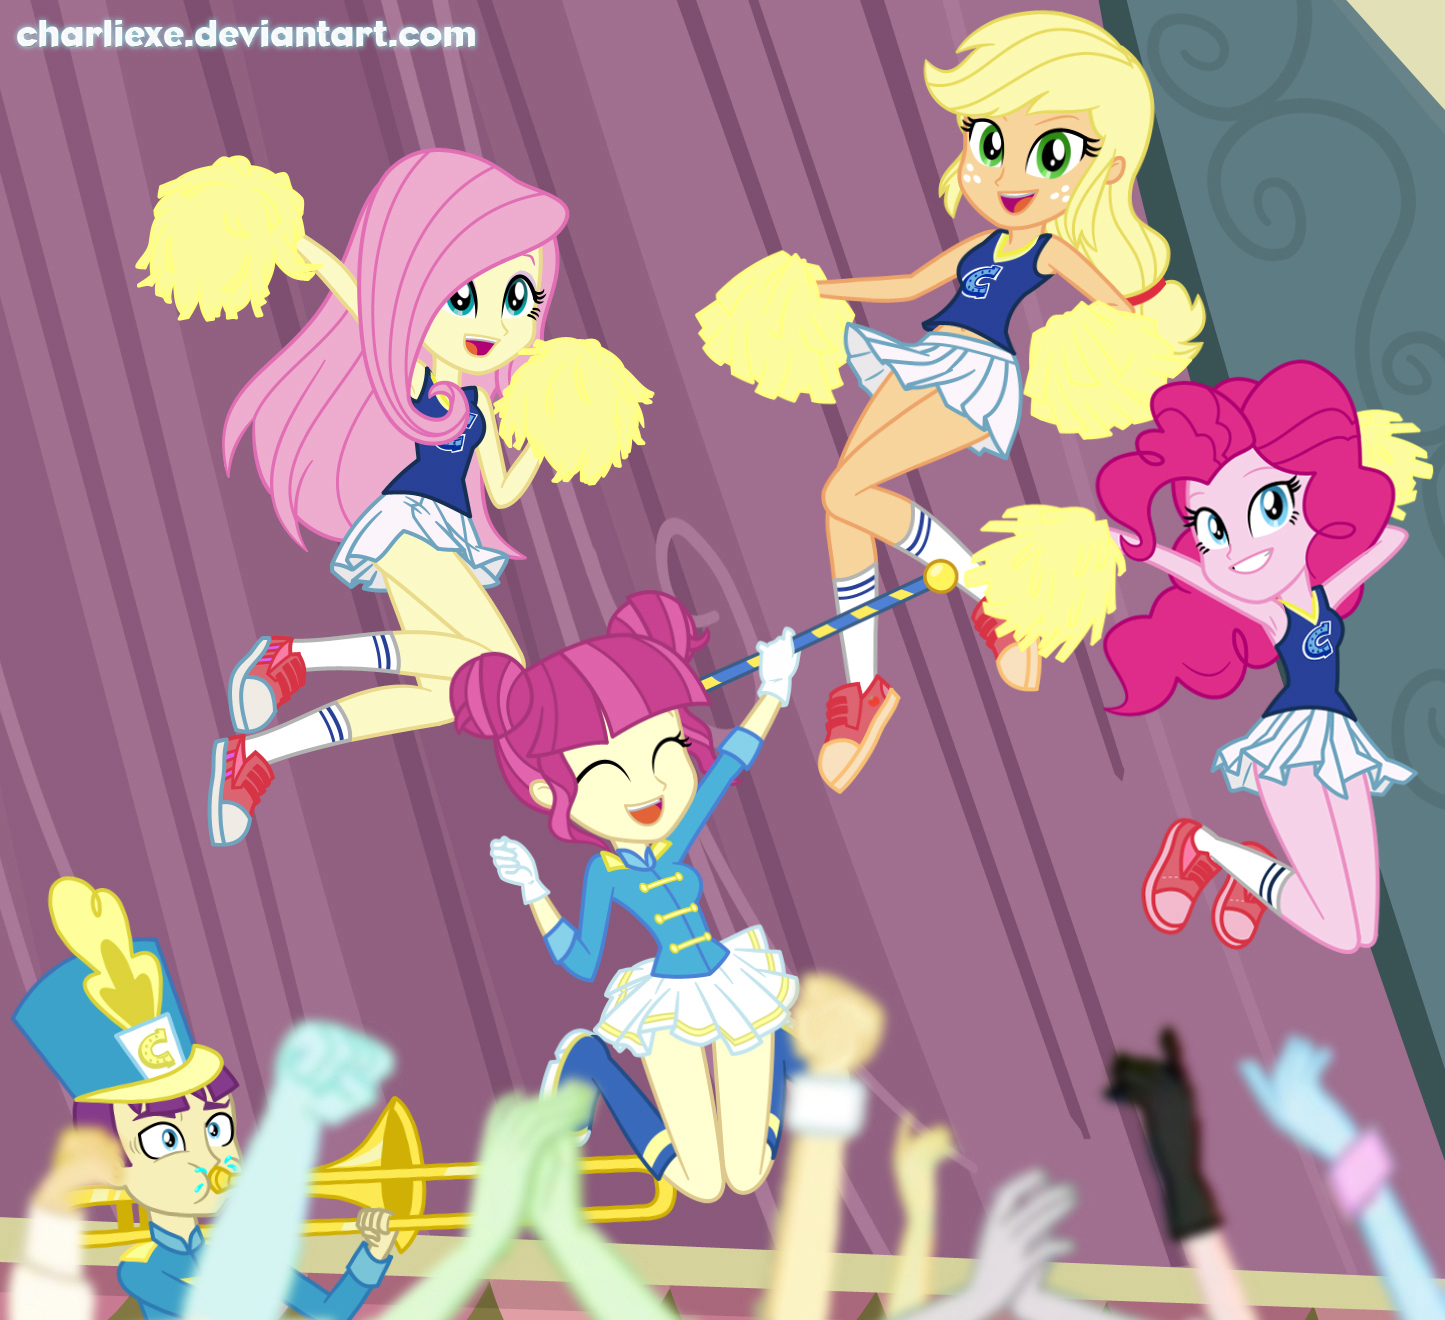 My Little Pony: Equestria Girls - Friendship Games Art by charliexe